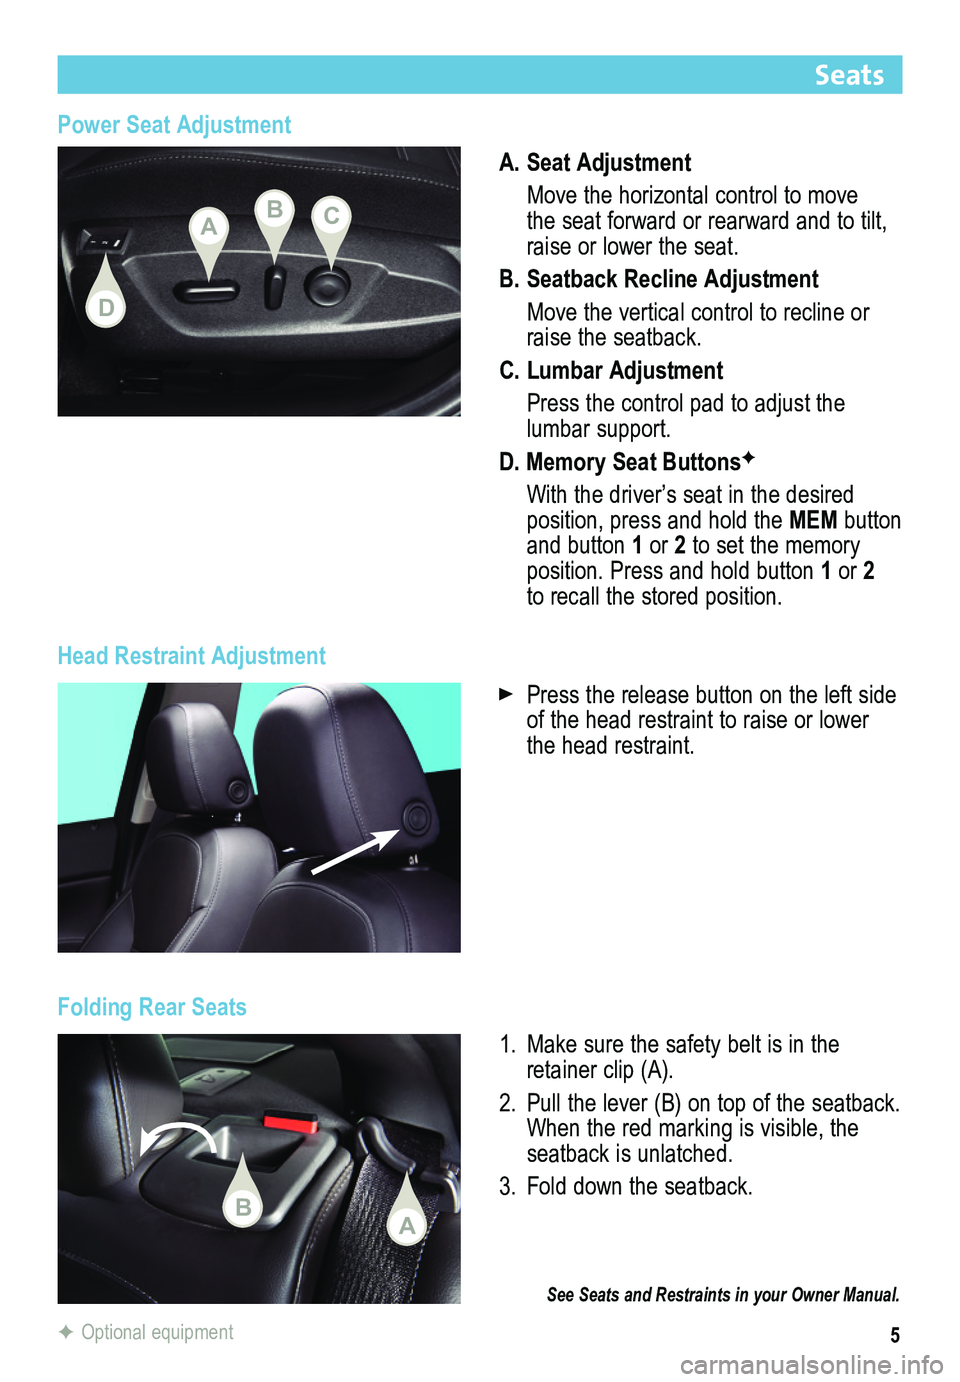 BUICK REGAL 2015  Get To Know Guide 5
Power Seat Adjustment
A. Seat Adjustment
 Move the horizontal control to move the seat forward or rearward and to tilt, raise or lower the seat.
B. Seatback Recline Adjustment
 Move the vertical con